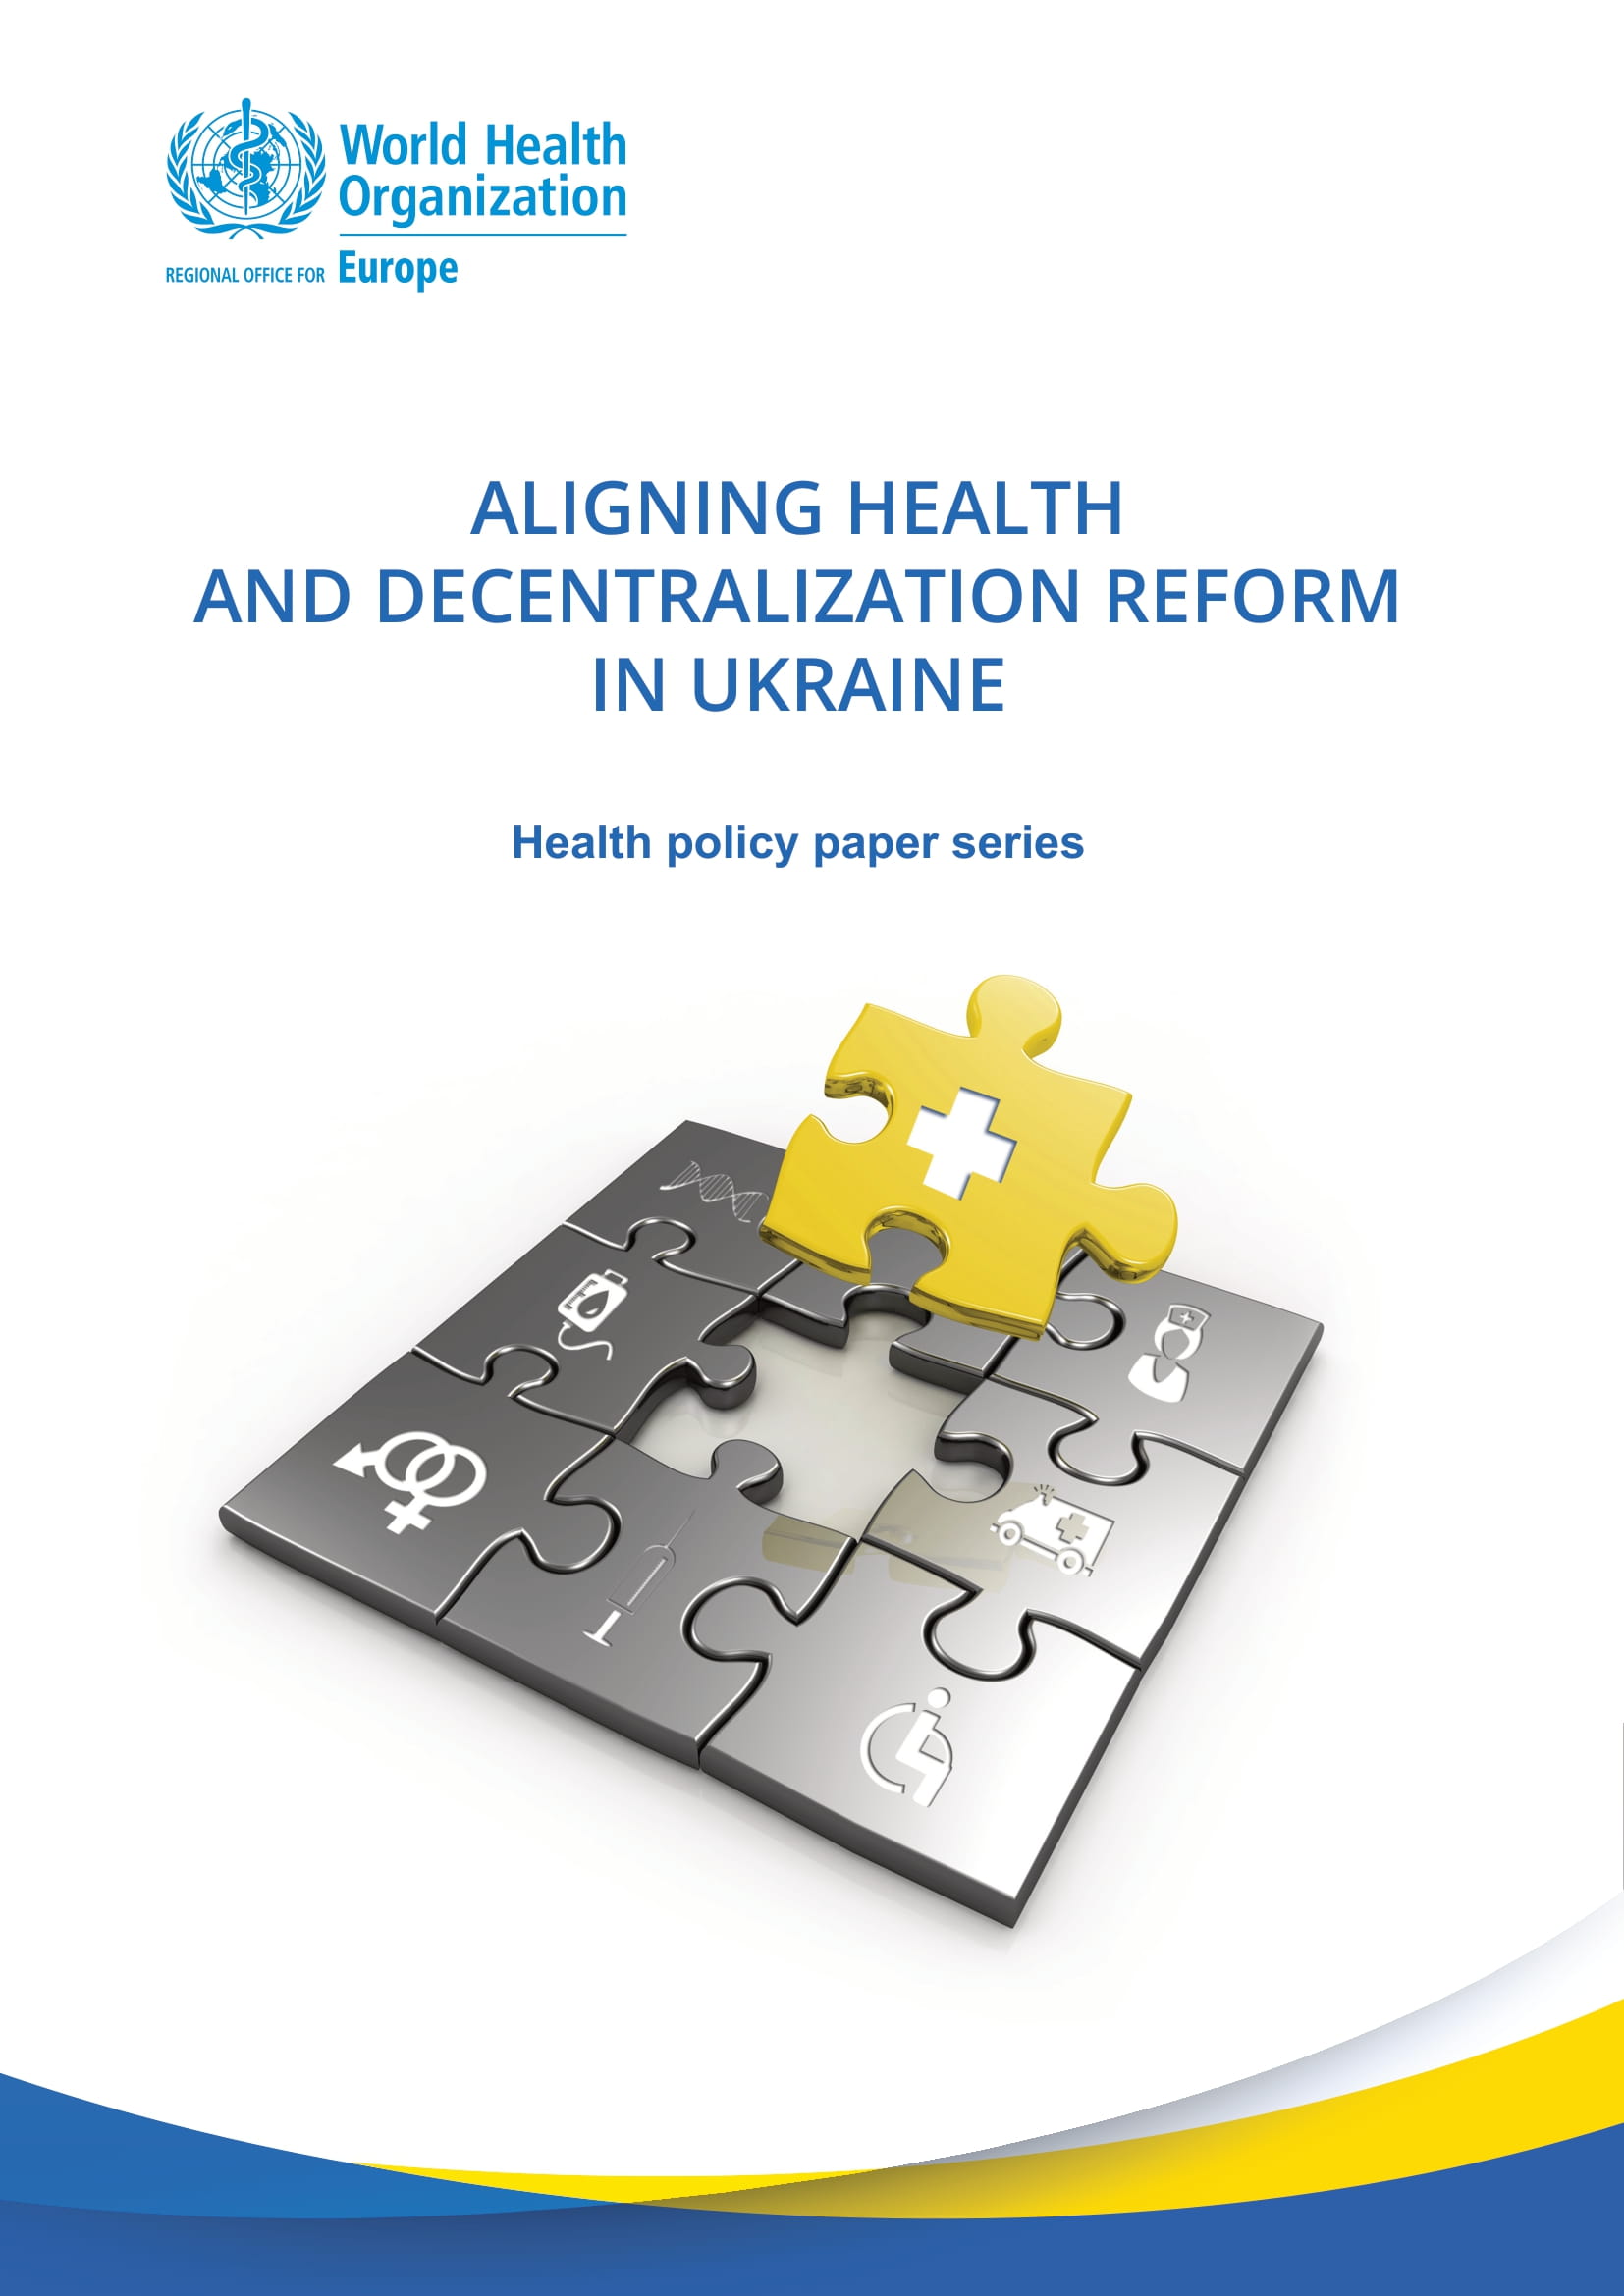 A new report published on aligning health and decentralization reform in Ukraine